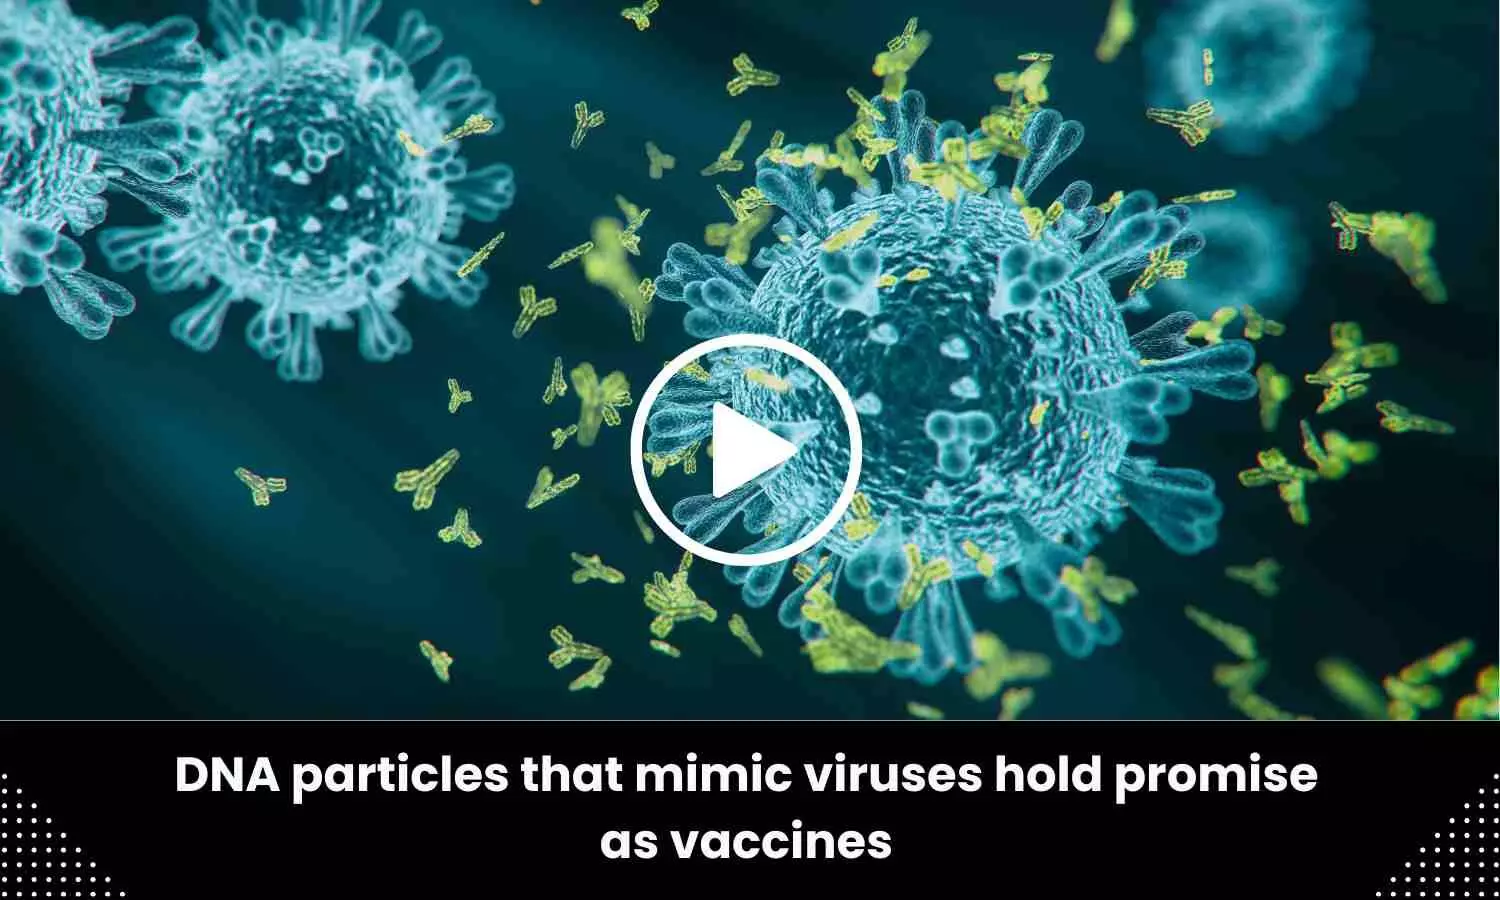 DNA particles that mimic viruses hold promise as vaccines